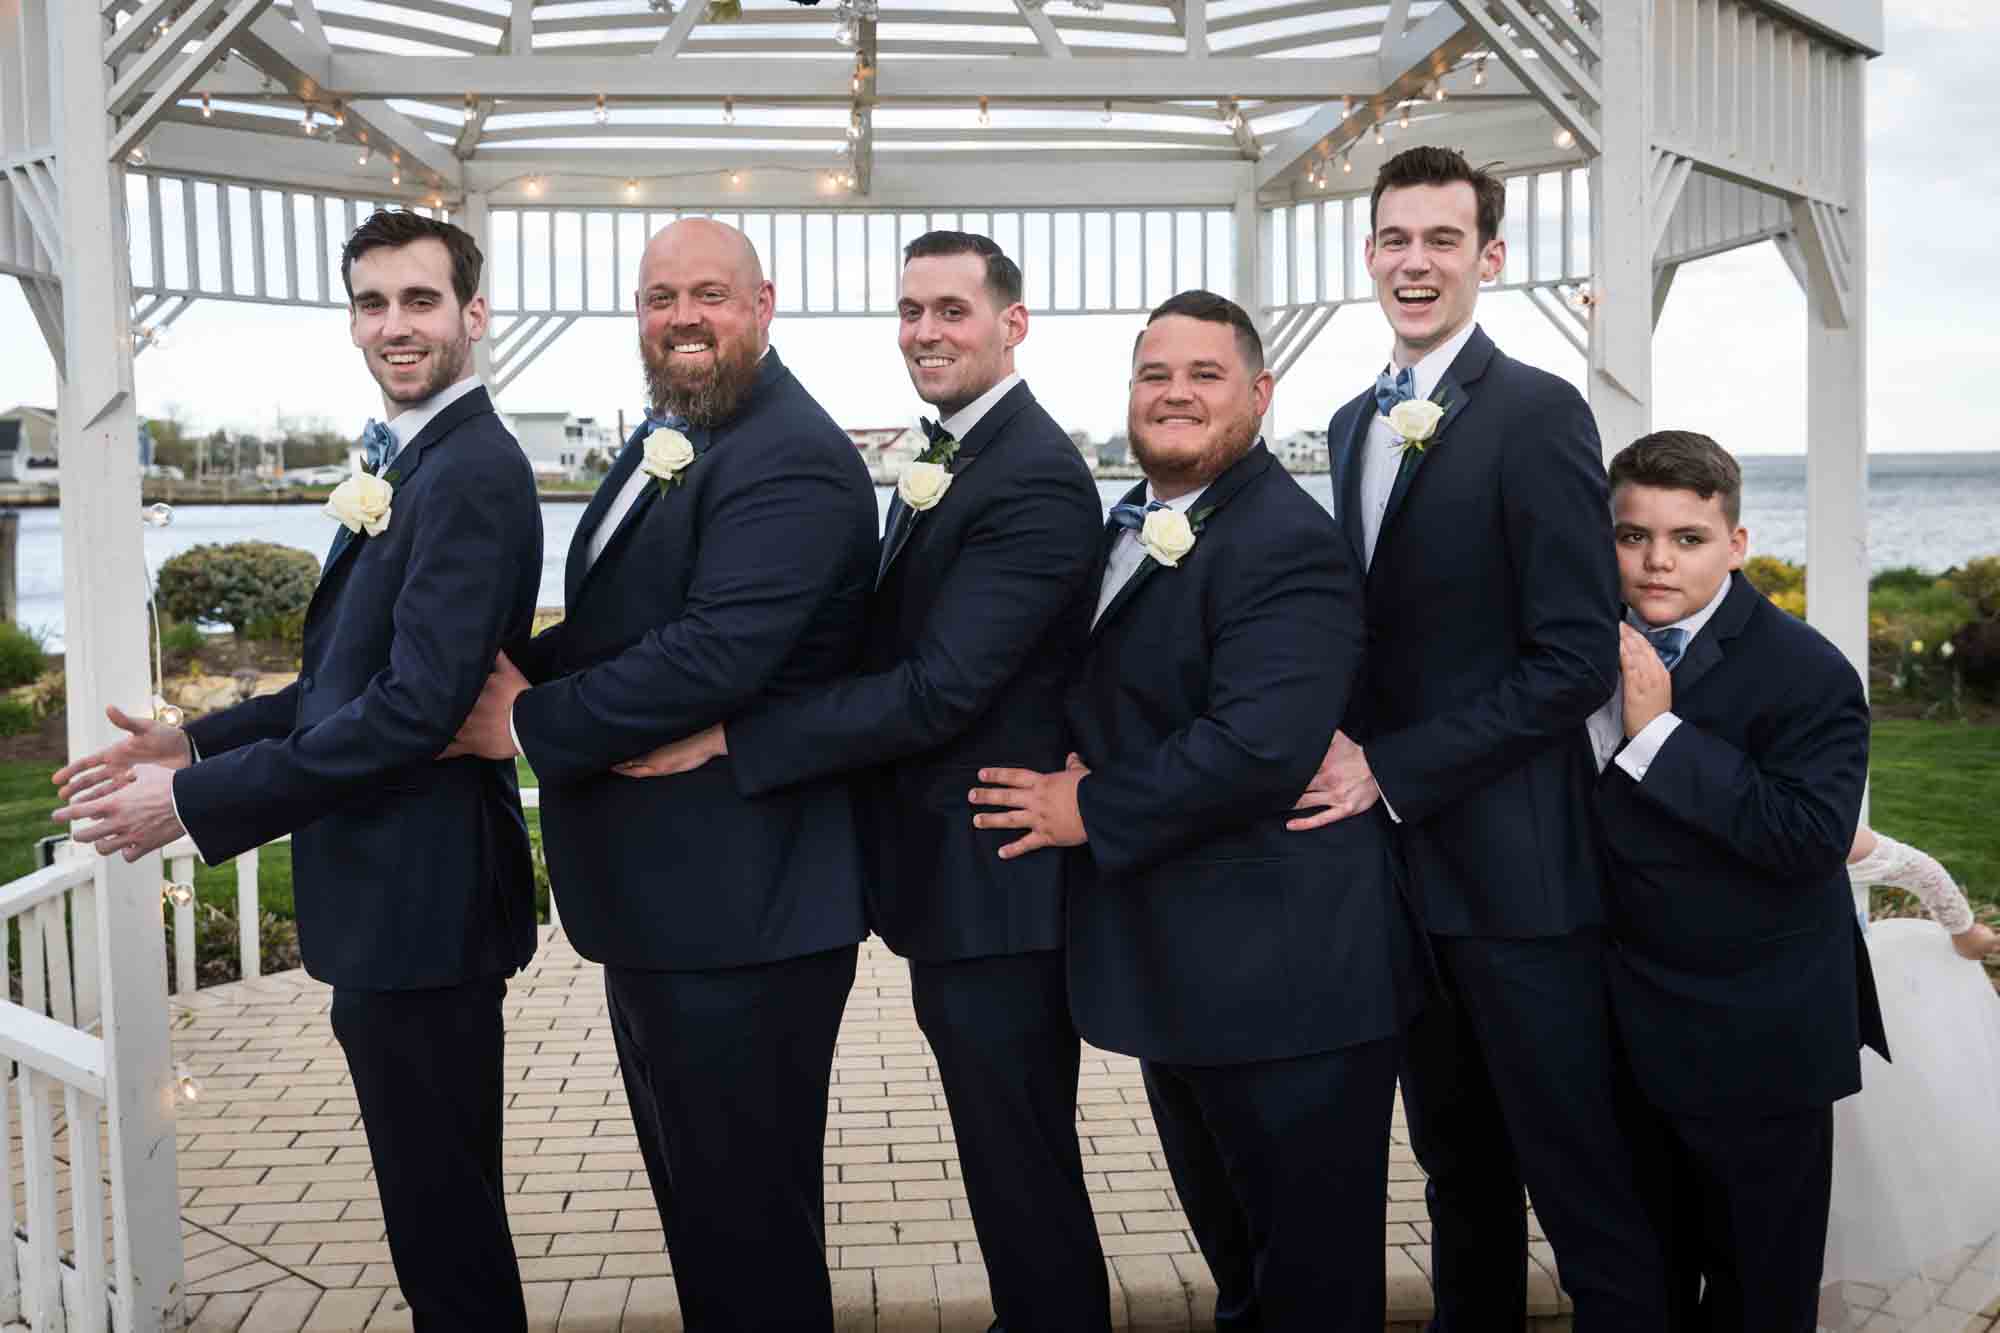 Riviera Waterfront Mansion wedding photos of groomsmen holding each other